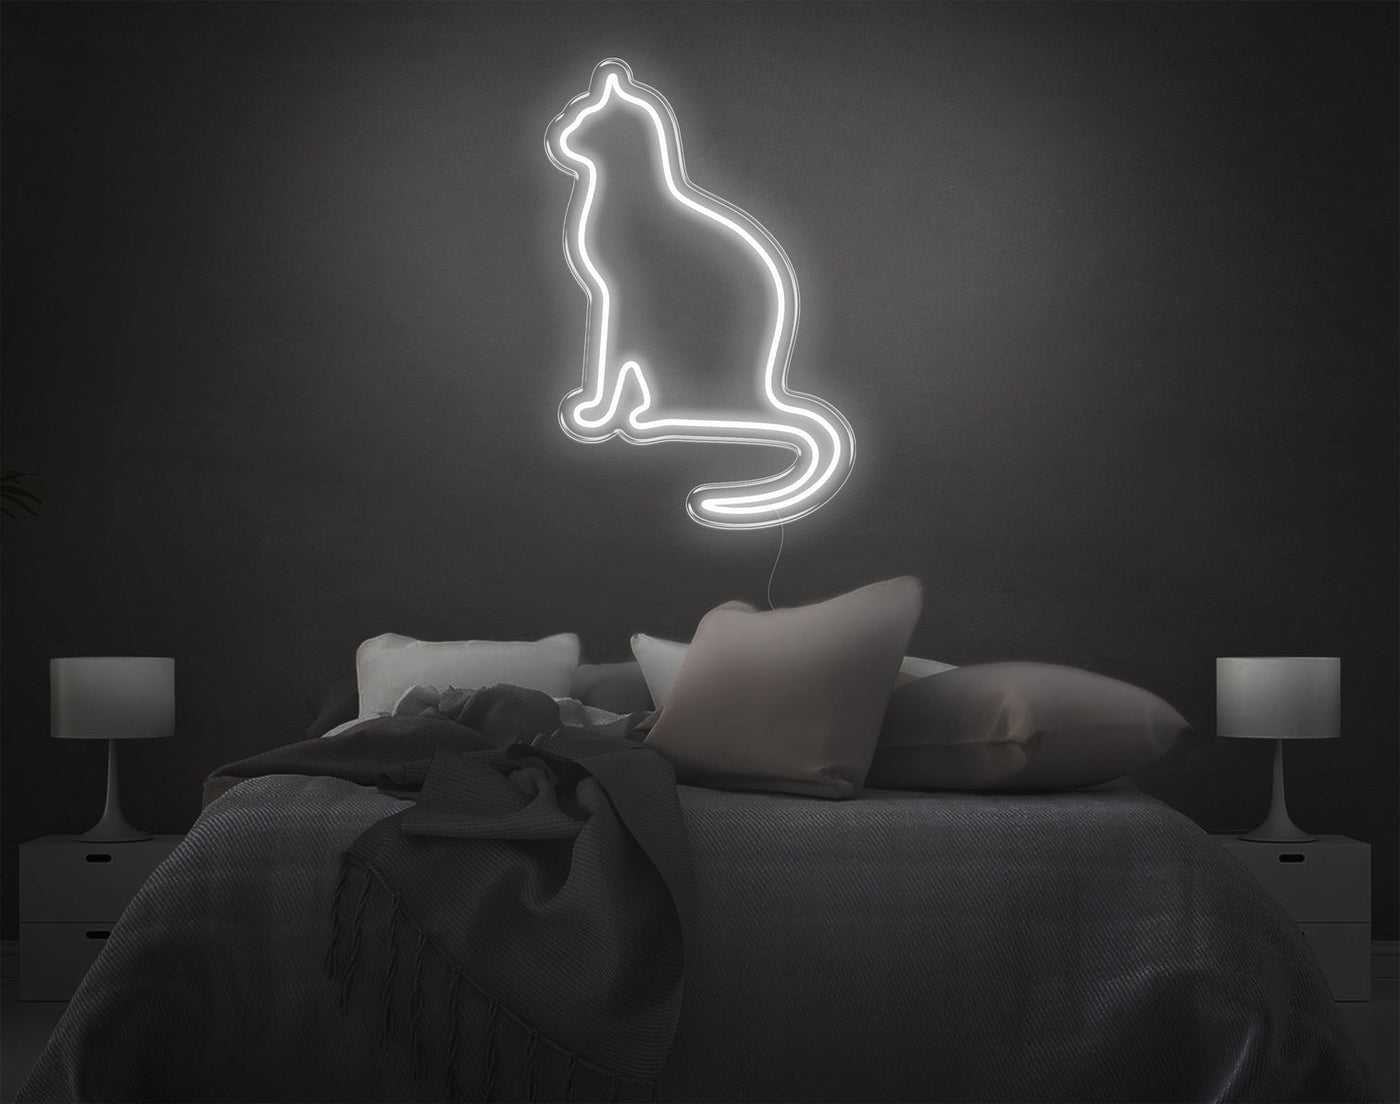 Cat V2 LED Neon Sign - 10inch x 6inchHot Pink